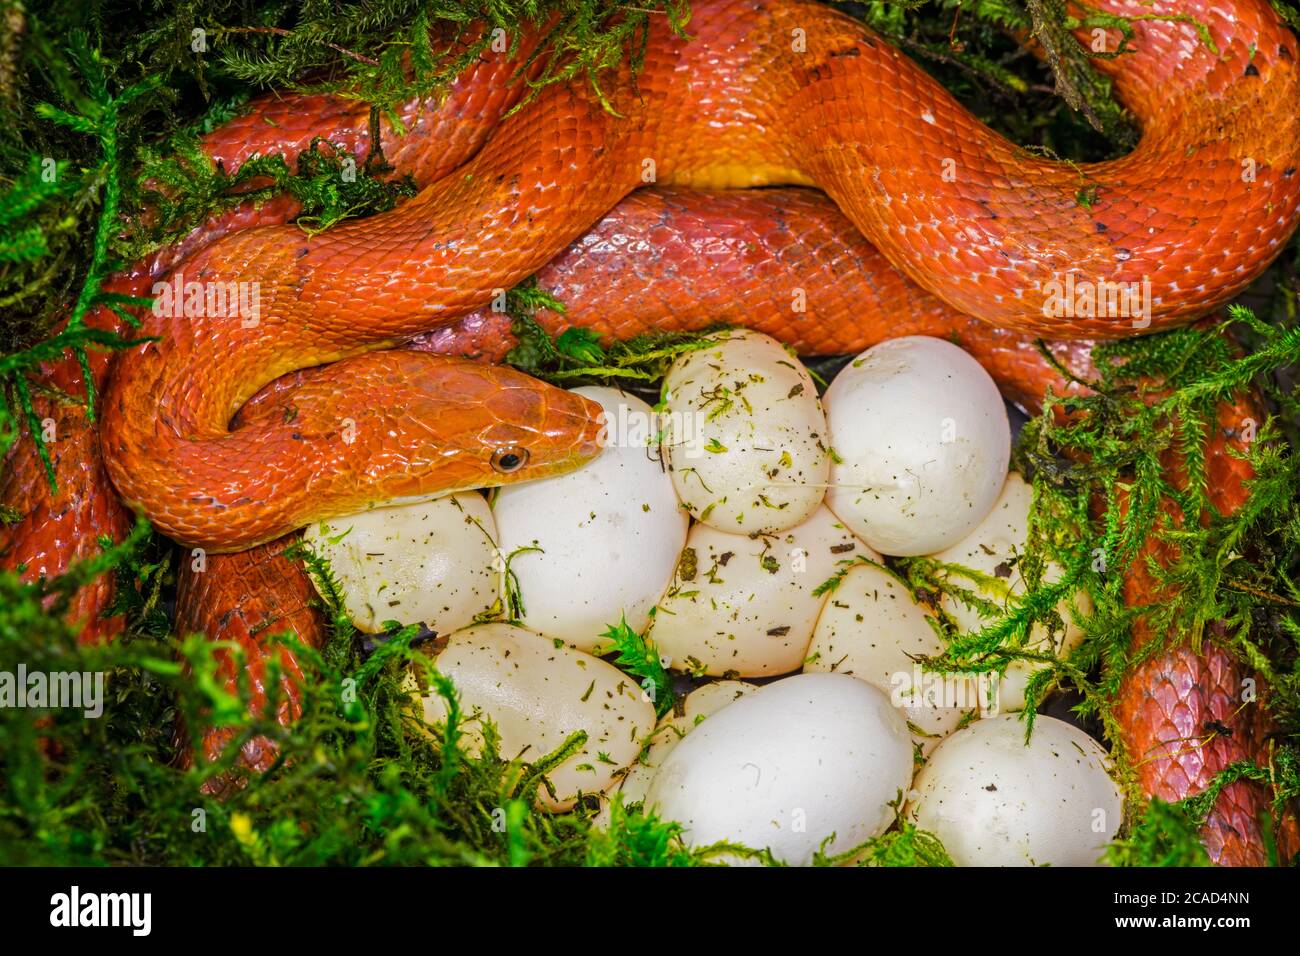 Corn snake Pantherophis guttatus, laying eggs, captive, native to the southeastern United States Stock Photo